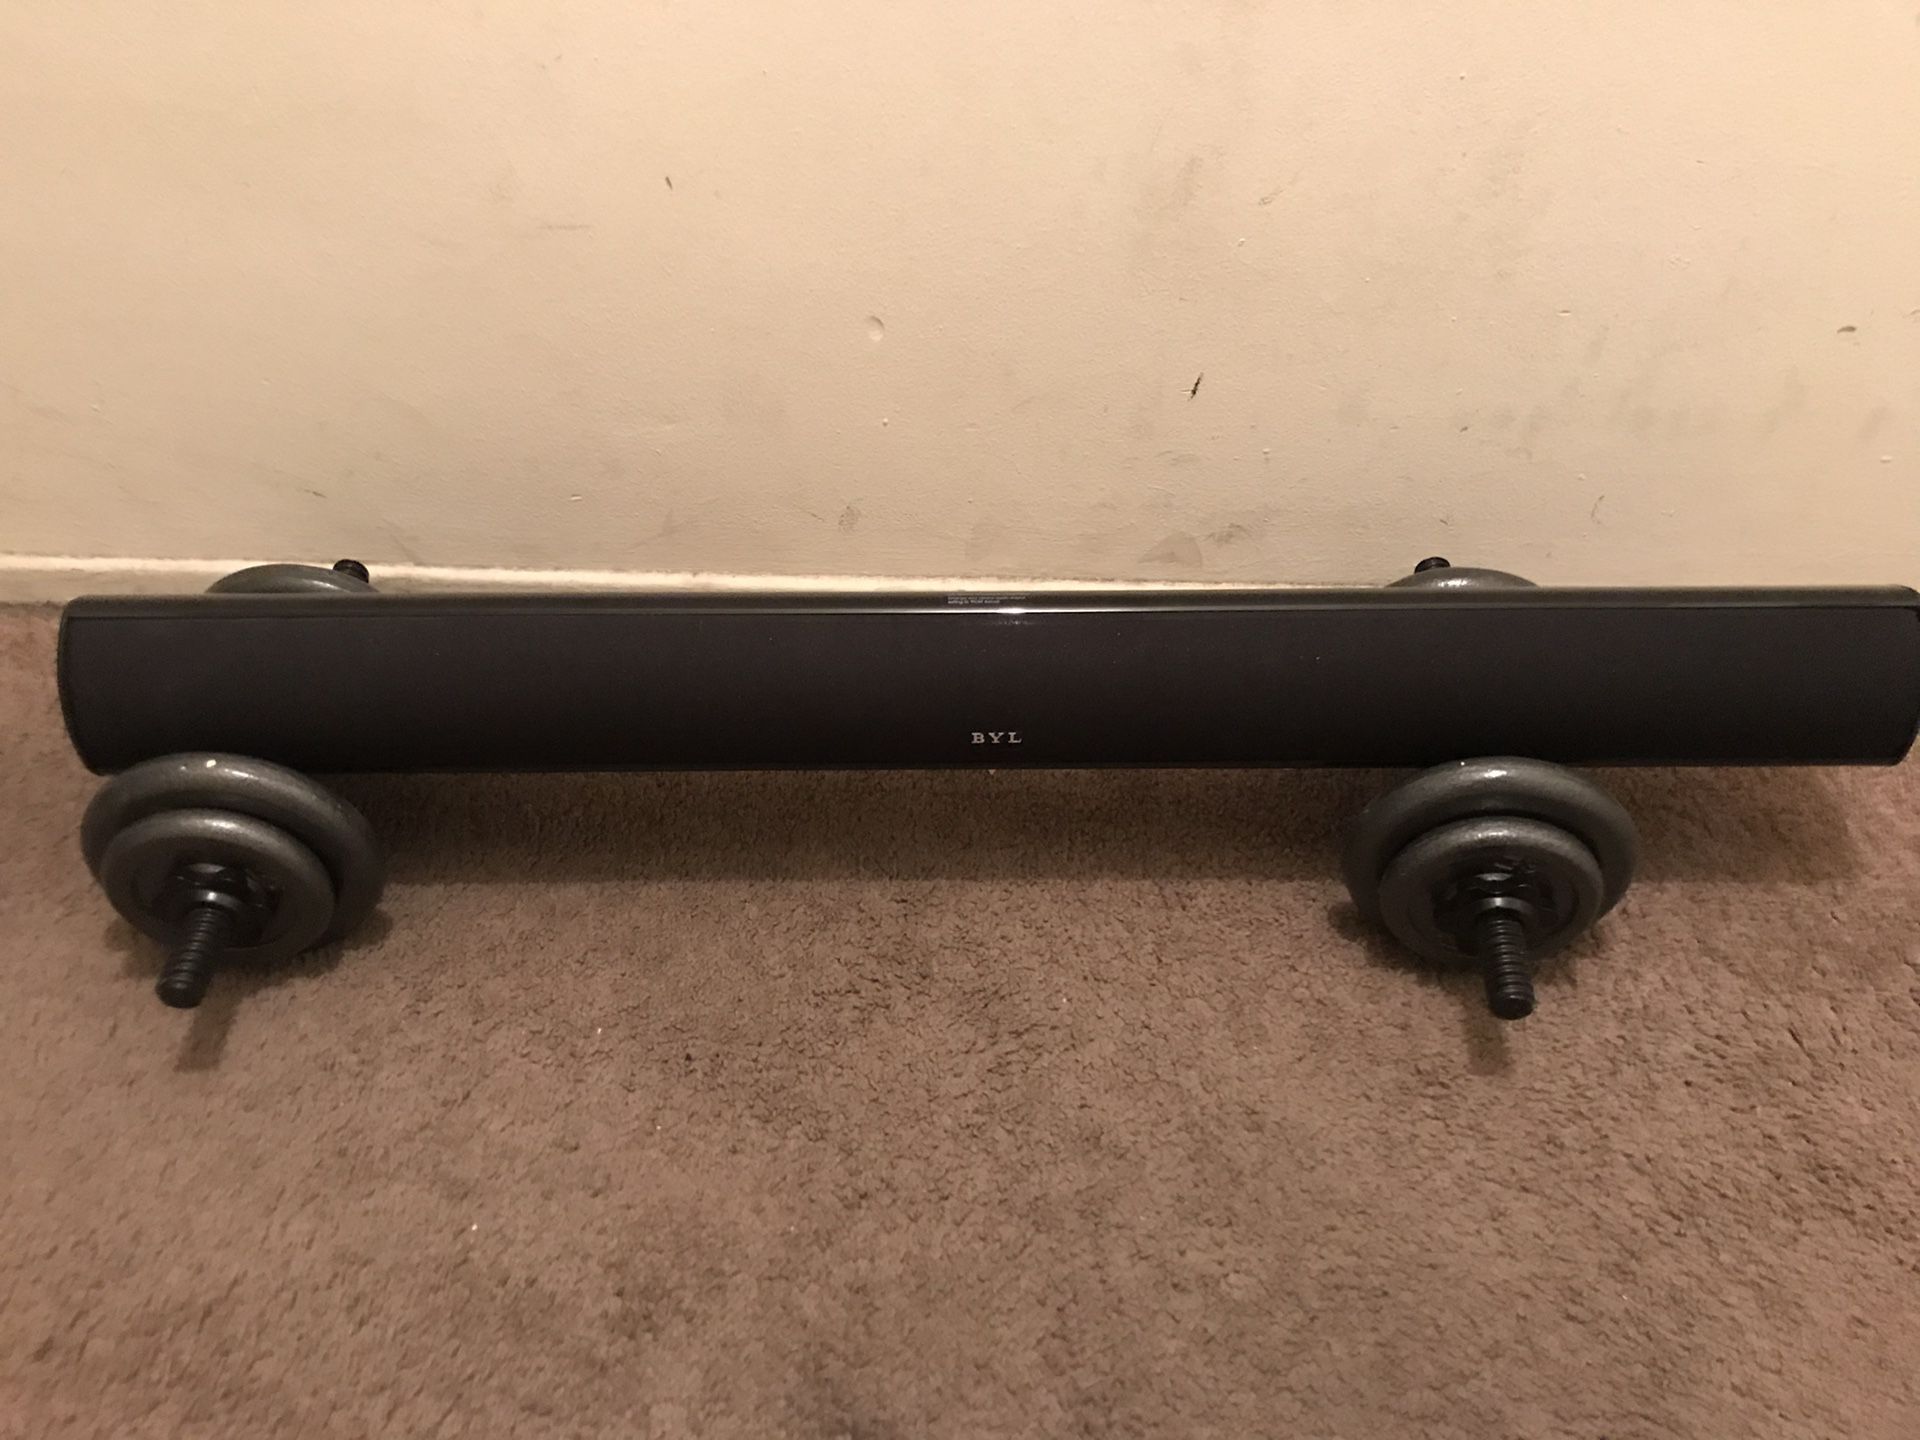 BYL sound bar with power cord and control (pick up only)